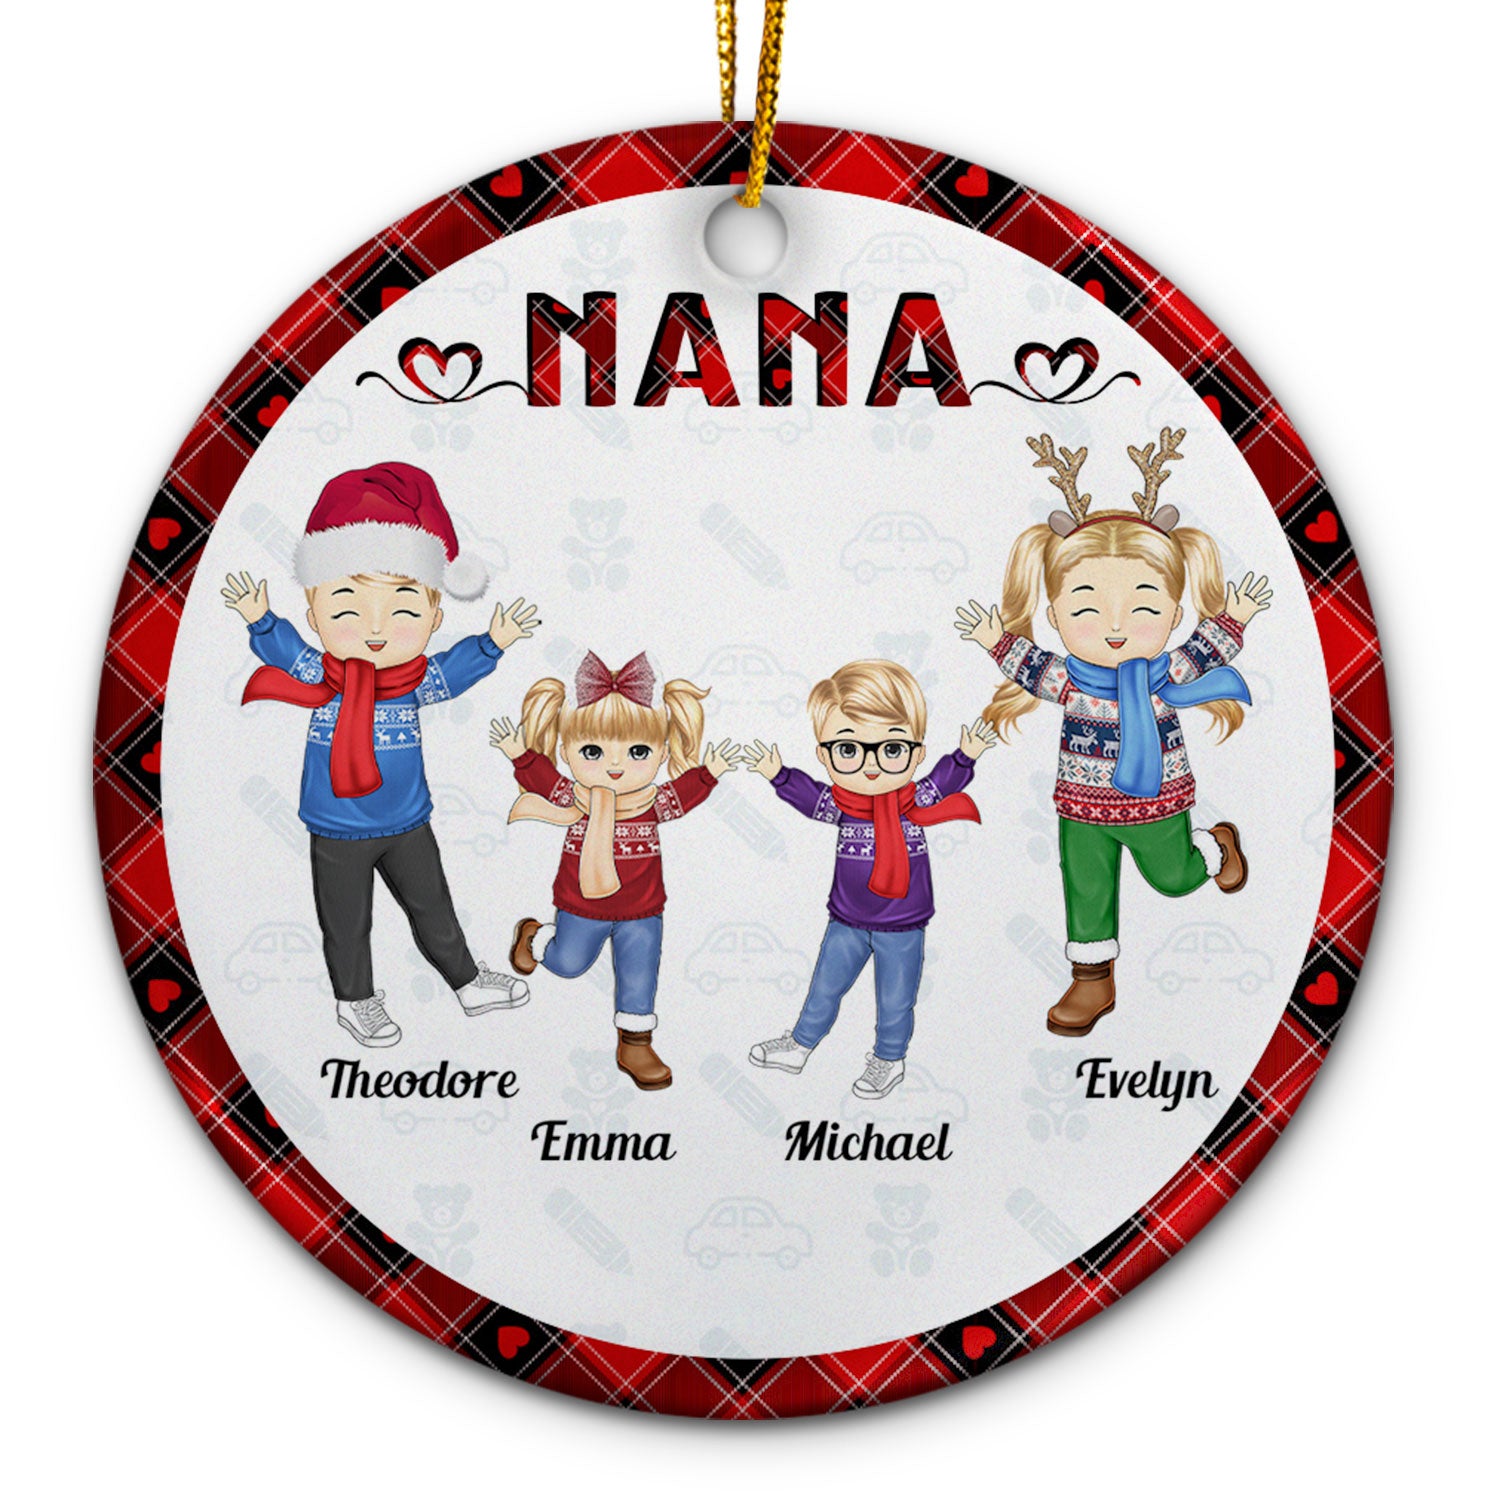 Nana Papa Daddy Mommy Grandkids - Christmas Gift For Grandparents, Parents, Family - Personalized Circle Ceramic Ornament